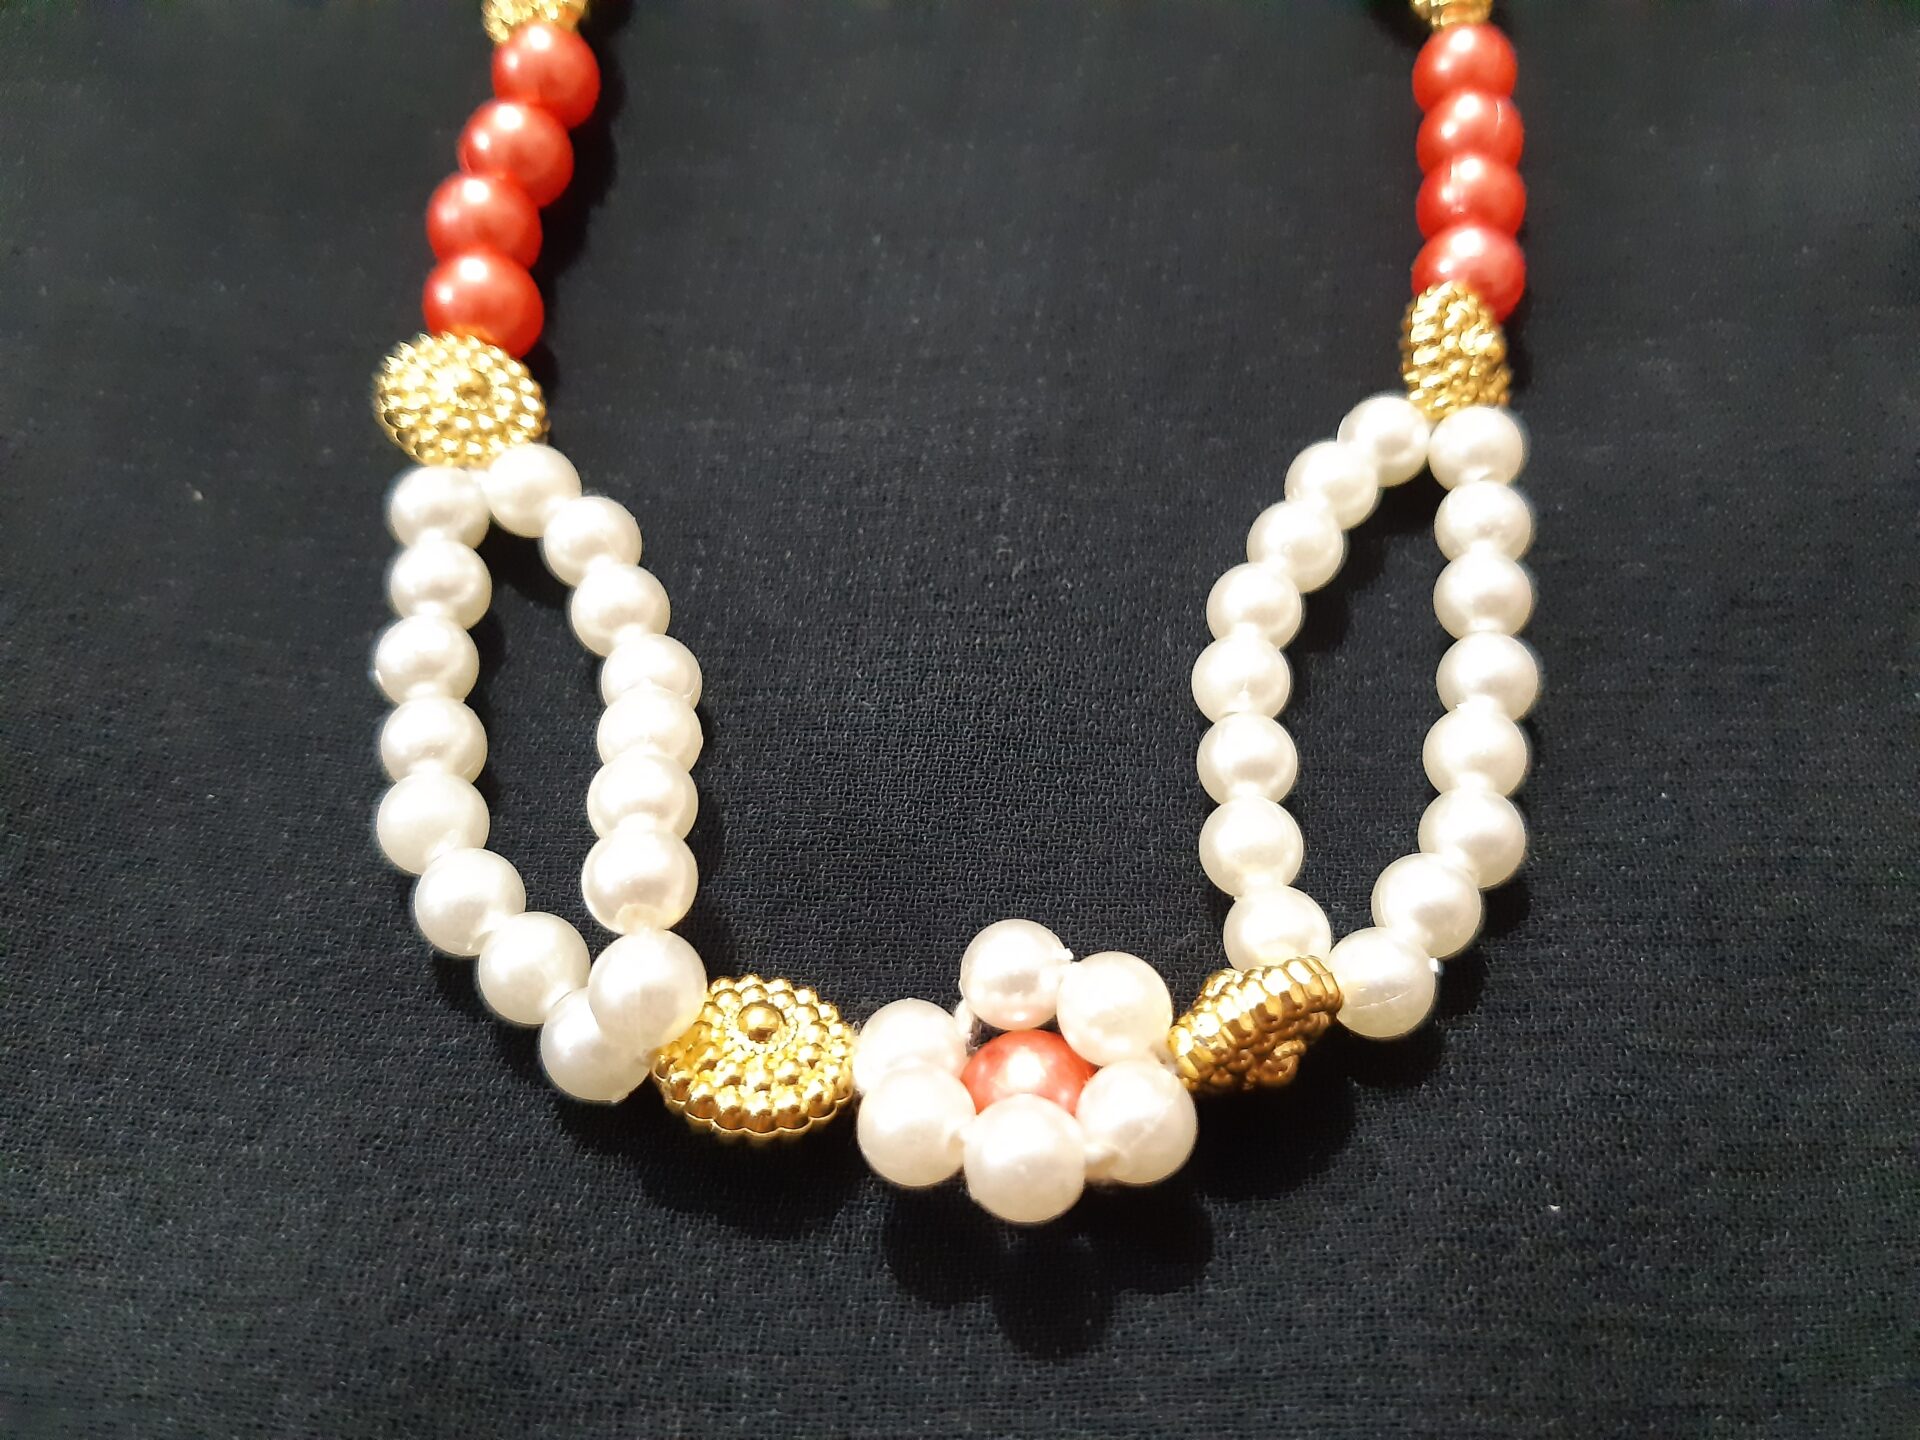 Handmade jewellery made of white and rose gold plastic beads in unique design. Suitable for all Gods and Goddesses. Glossy beads. The tie length can be adjusted as per individual. Can be used as gift to commemorate festivals/Pooja. Decoration for Hindu idols.